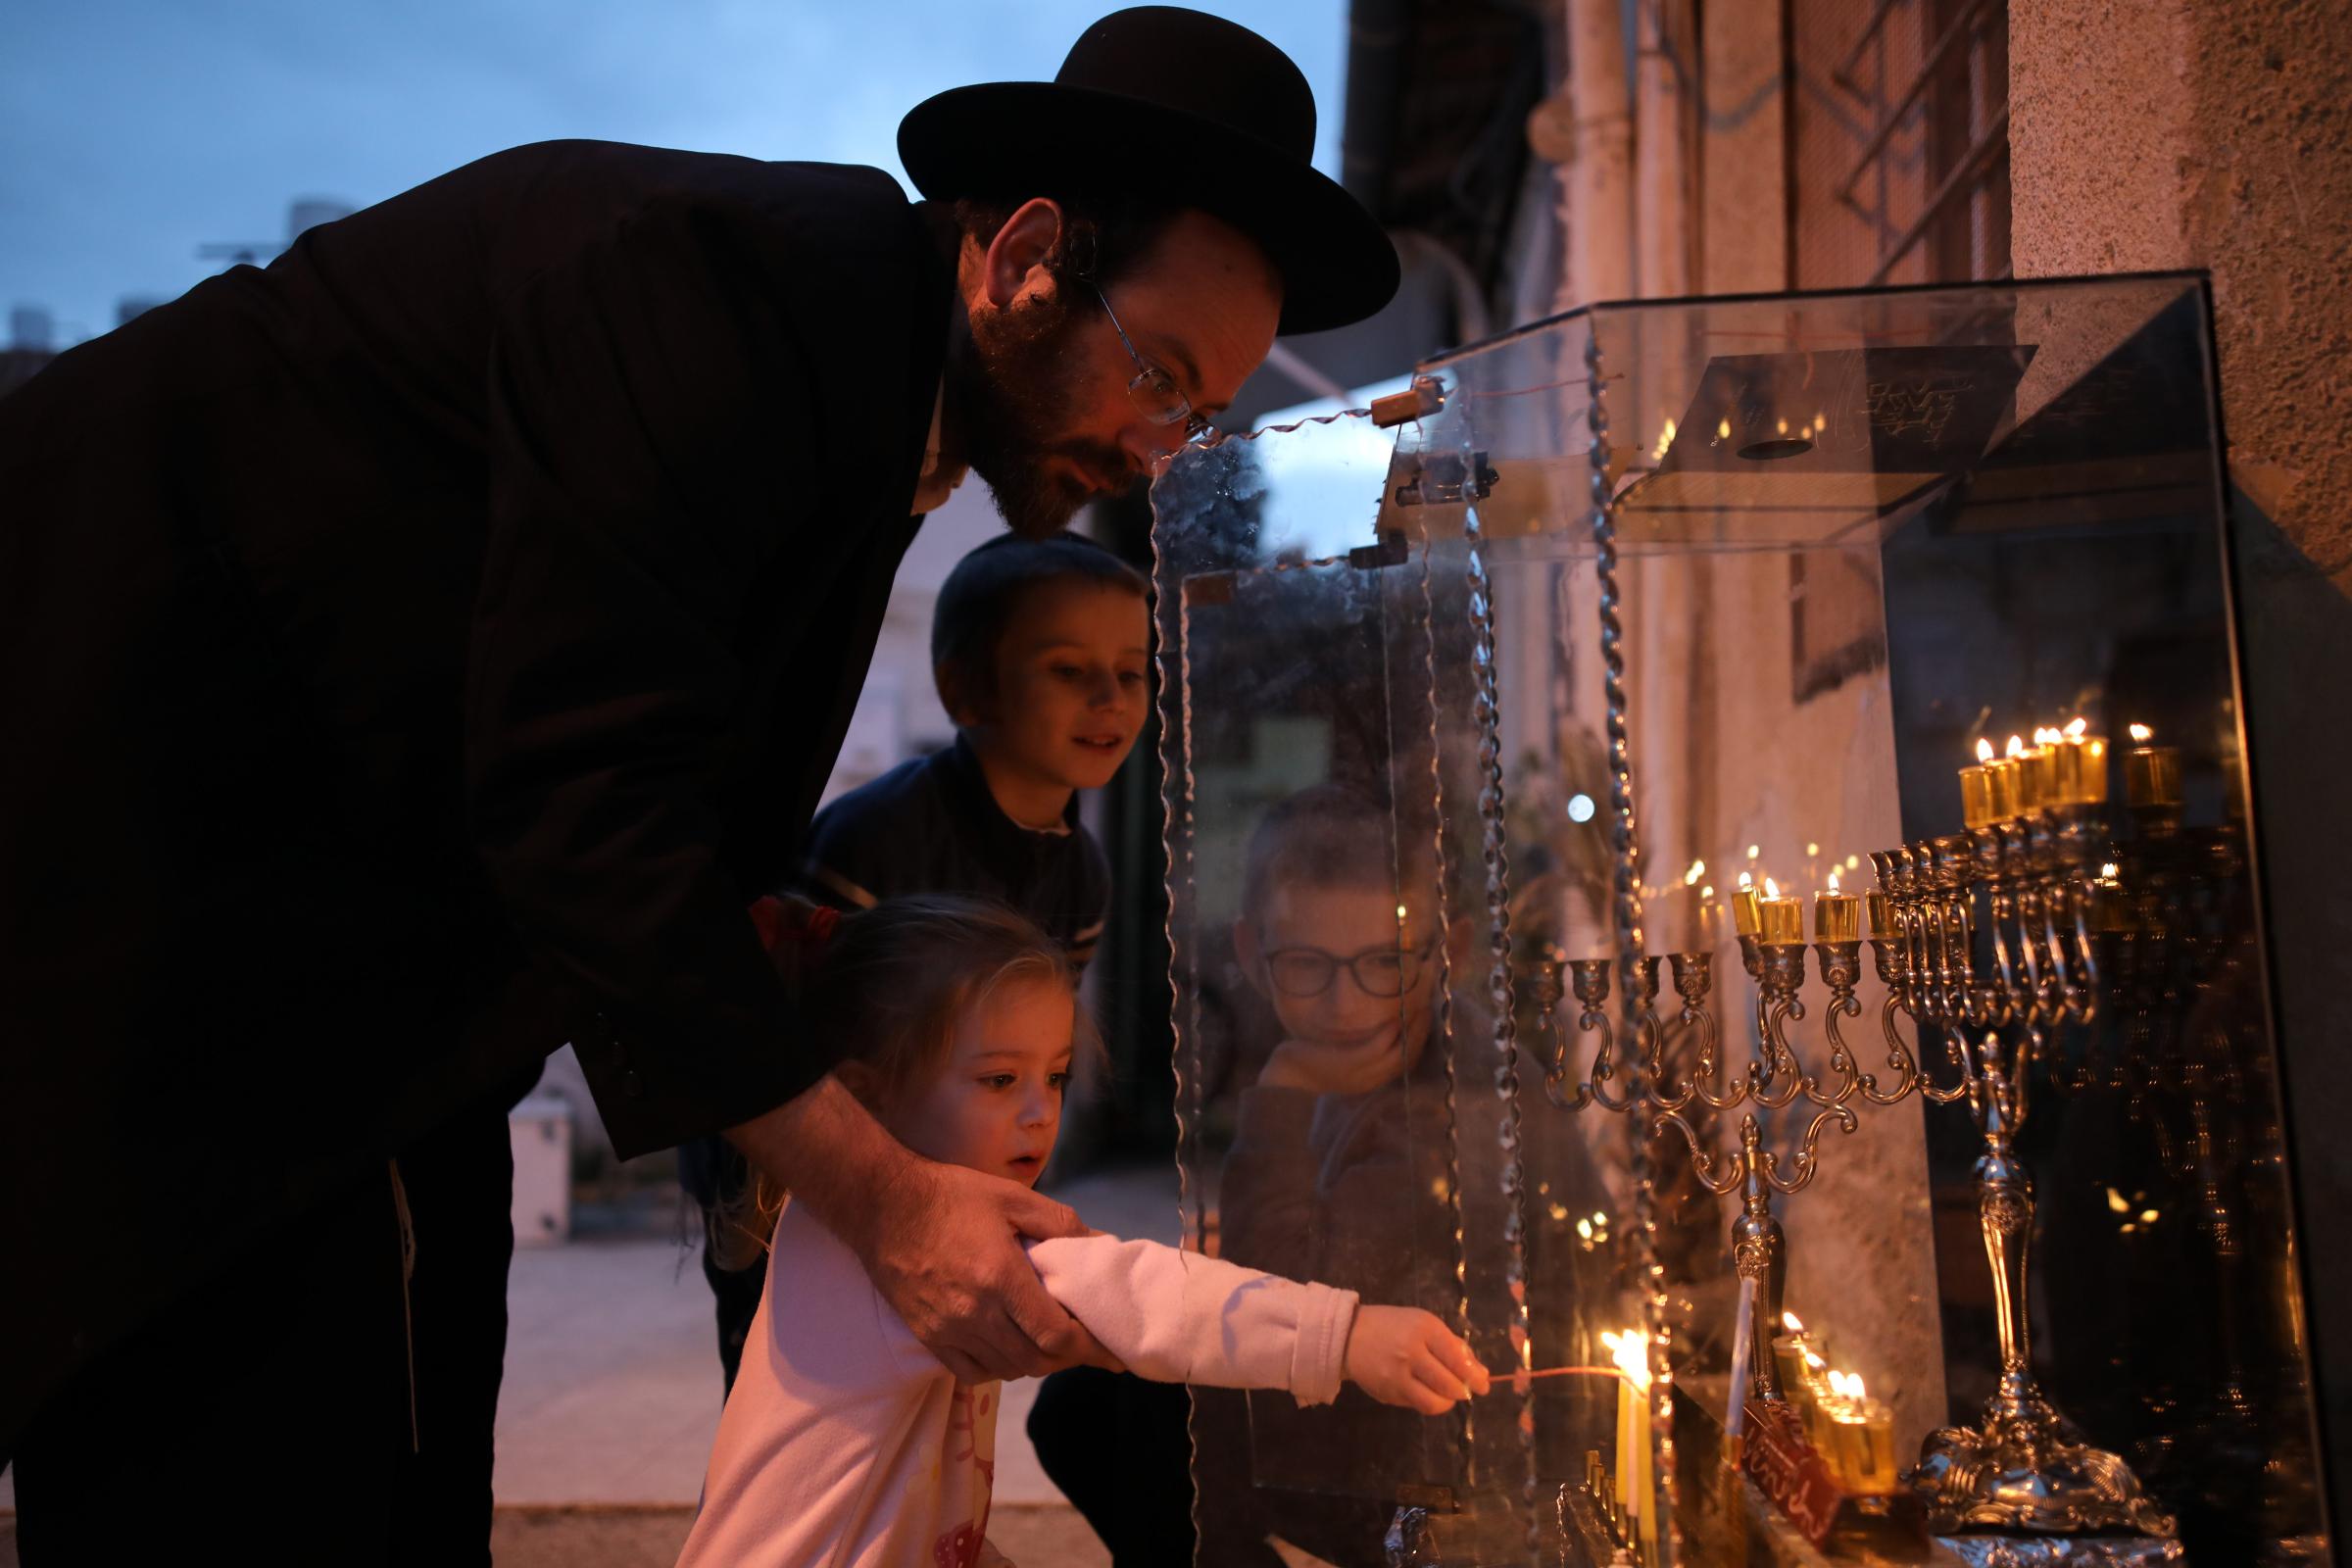 Ultra-Orthodox Community - An ultra-orthodox Jewish family lights candles at their...